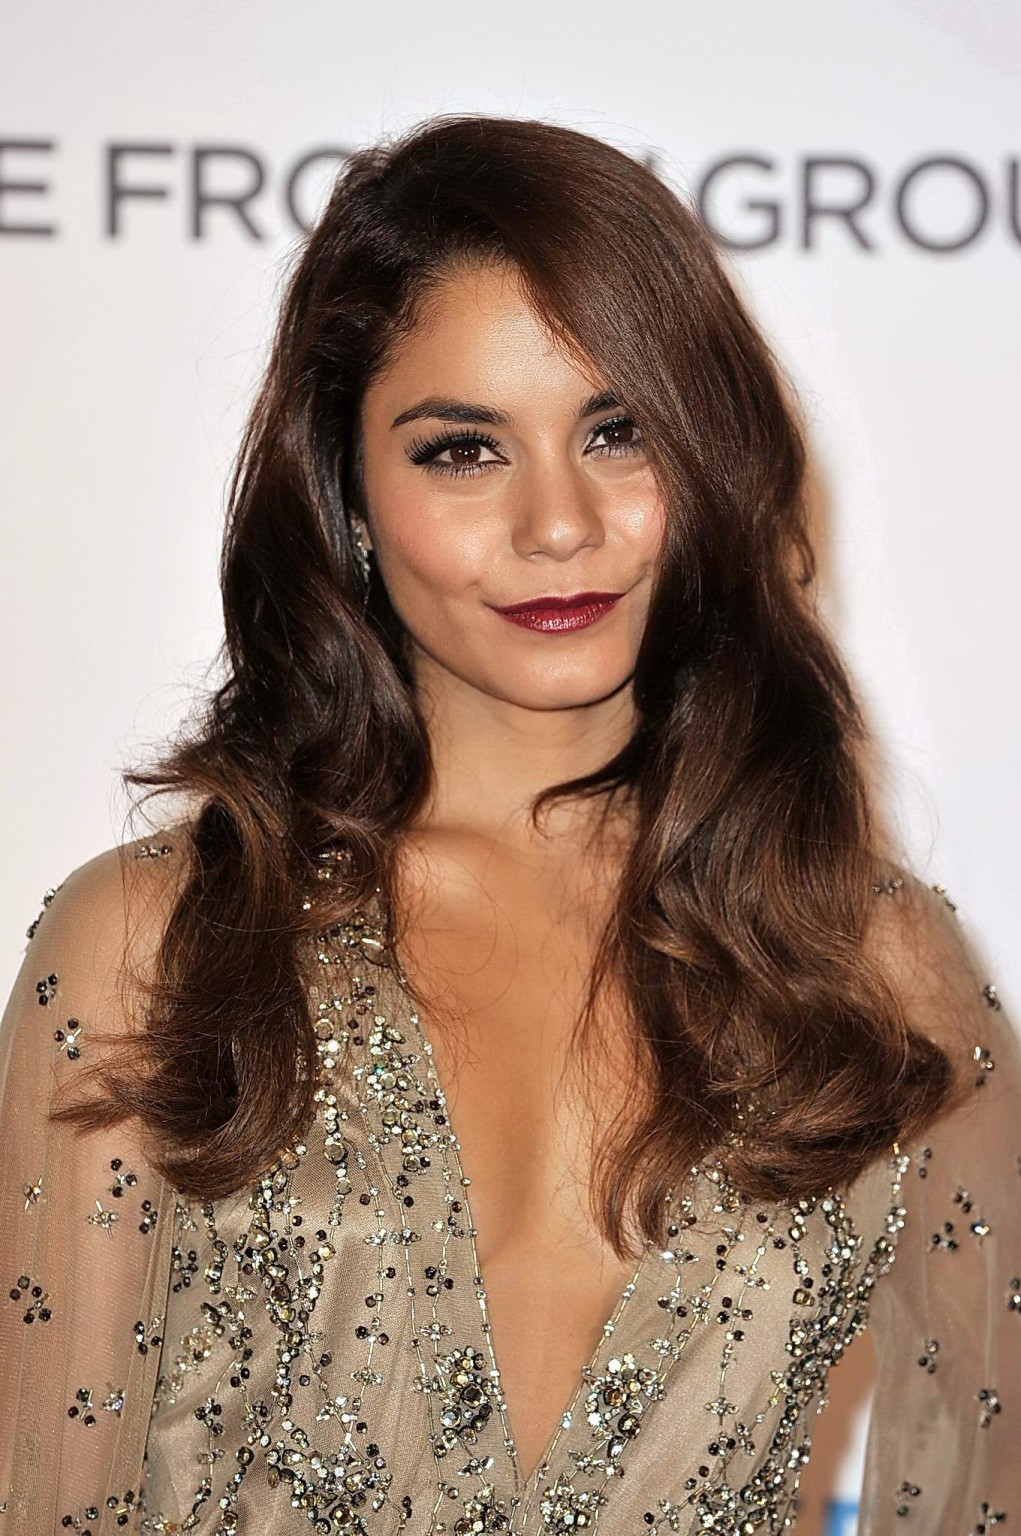 Vanessa Hudgens braless showing huge cleavage in a see-through outfit at The Fro #75224472